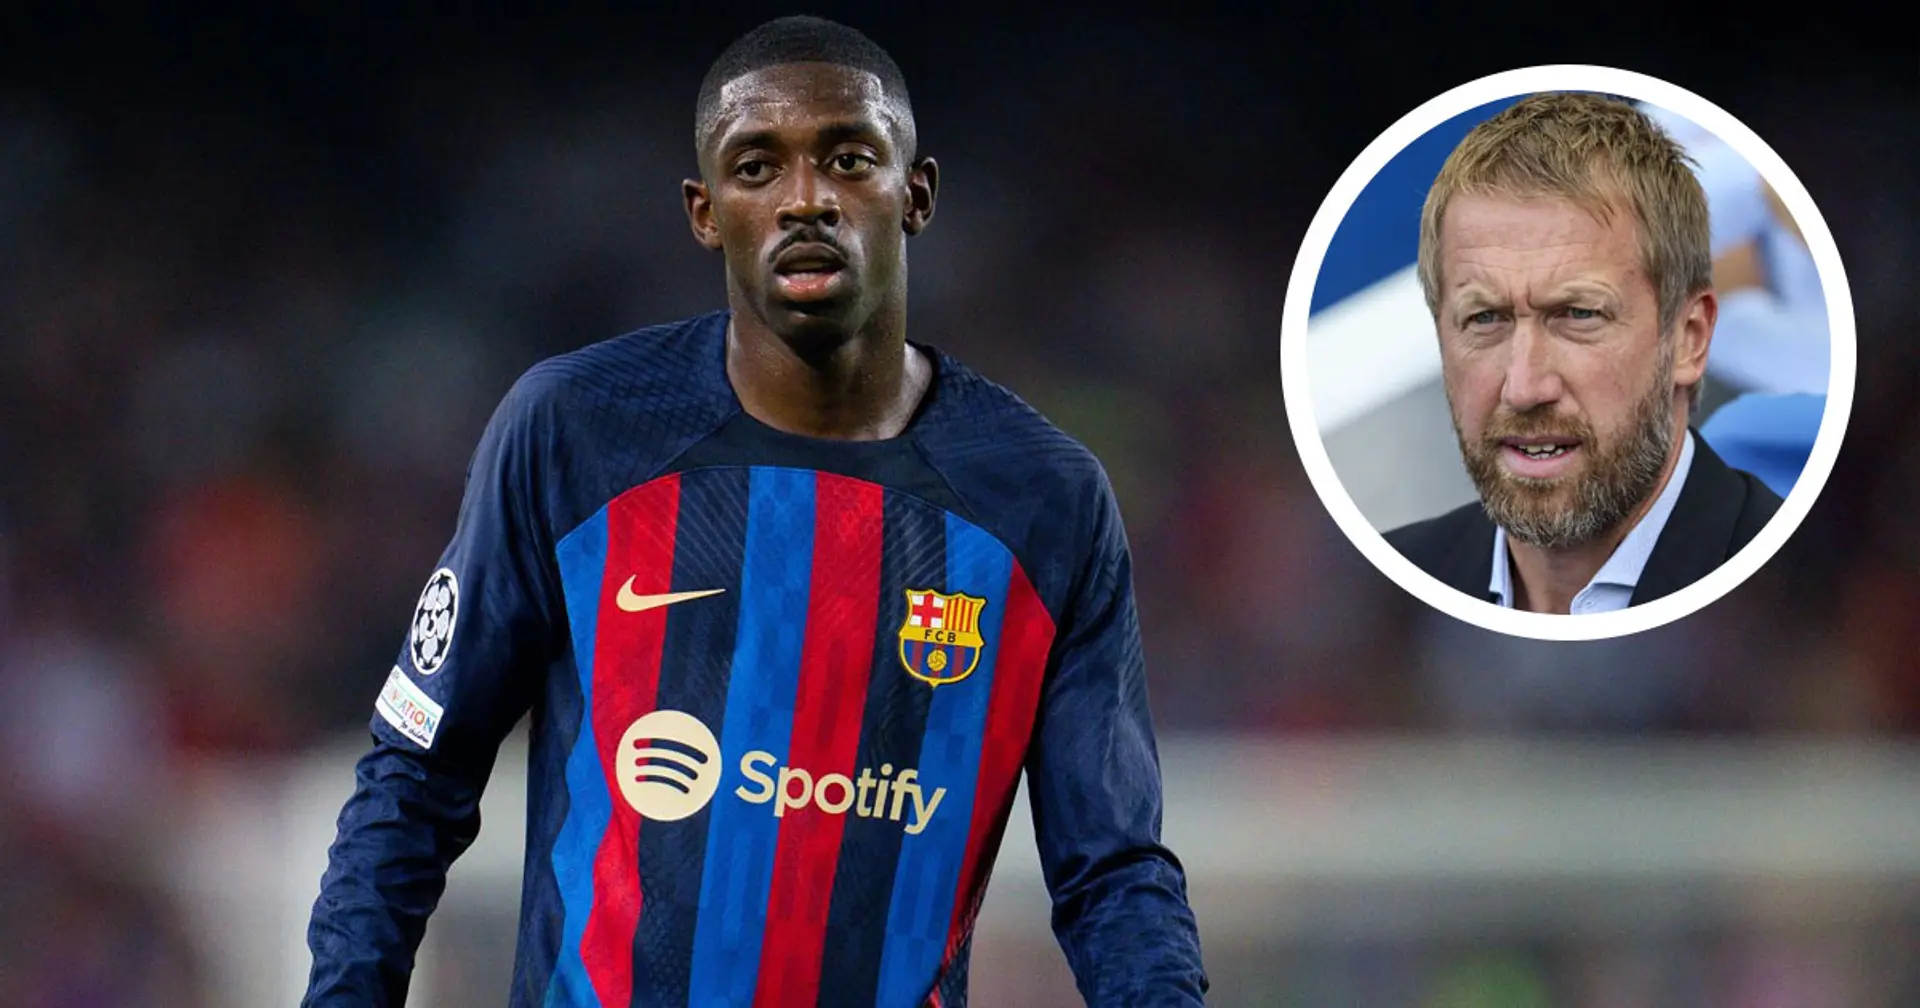 Chelsea interested in signing Dembele by activating his release clause - possible fee revealed (reliability: 3 stars)